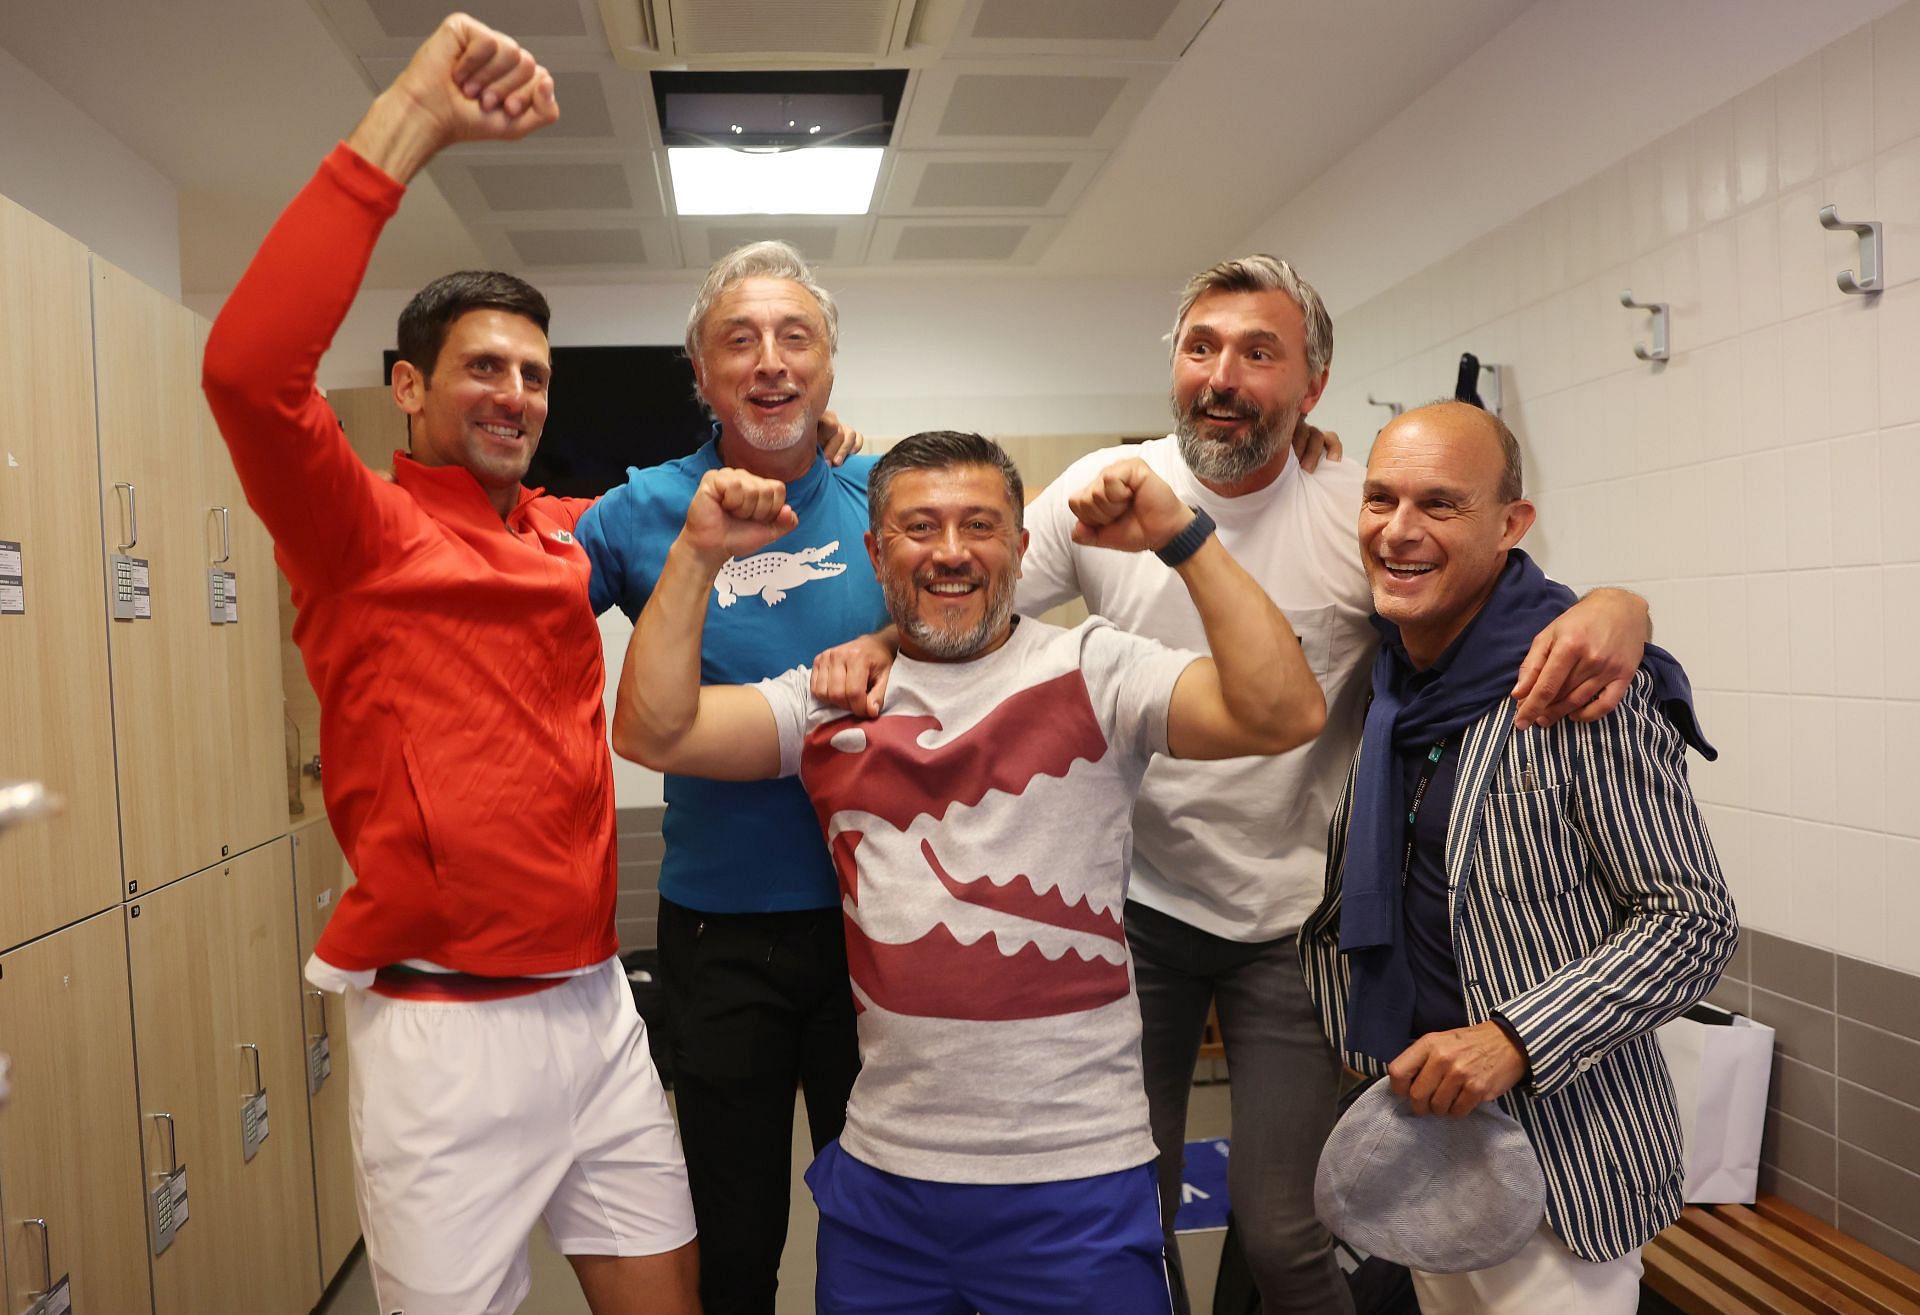 Djokovic celebrates with his team after winning in Rome